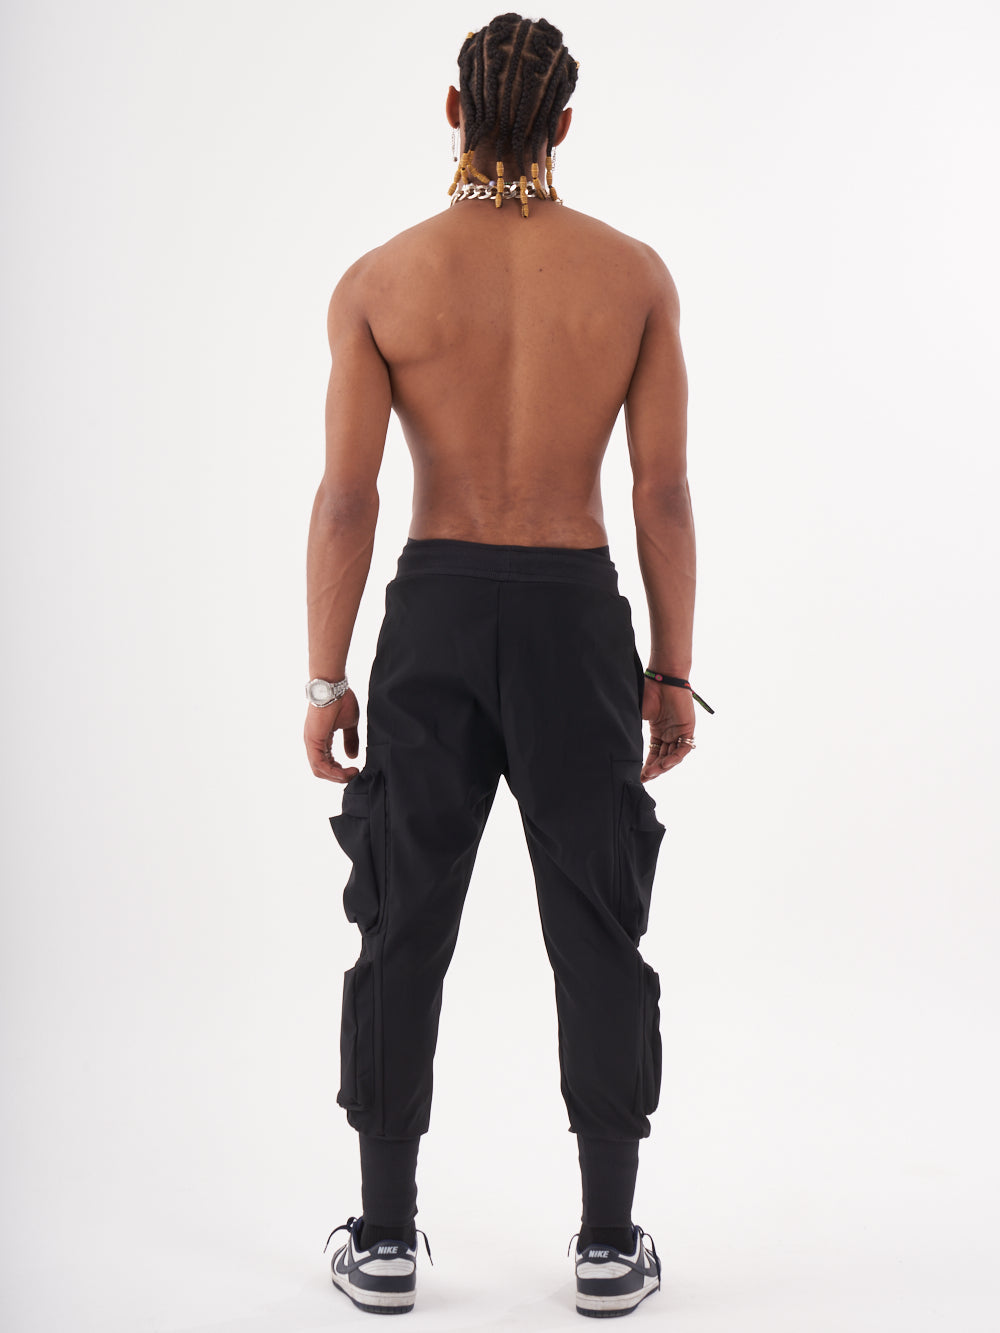 The back view of a man wearing OUTLIER JOGGERS | BLACK cargo pants.